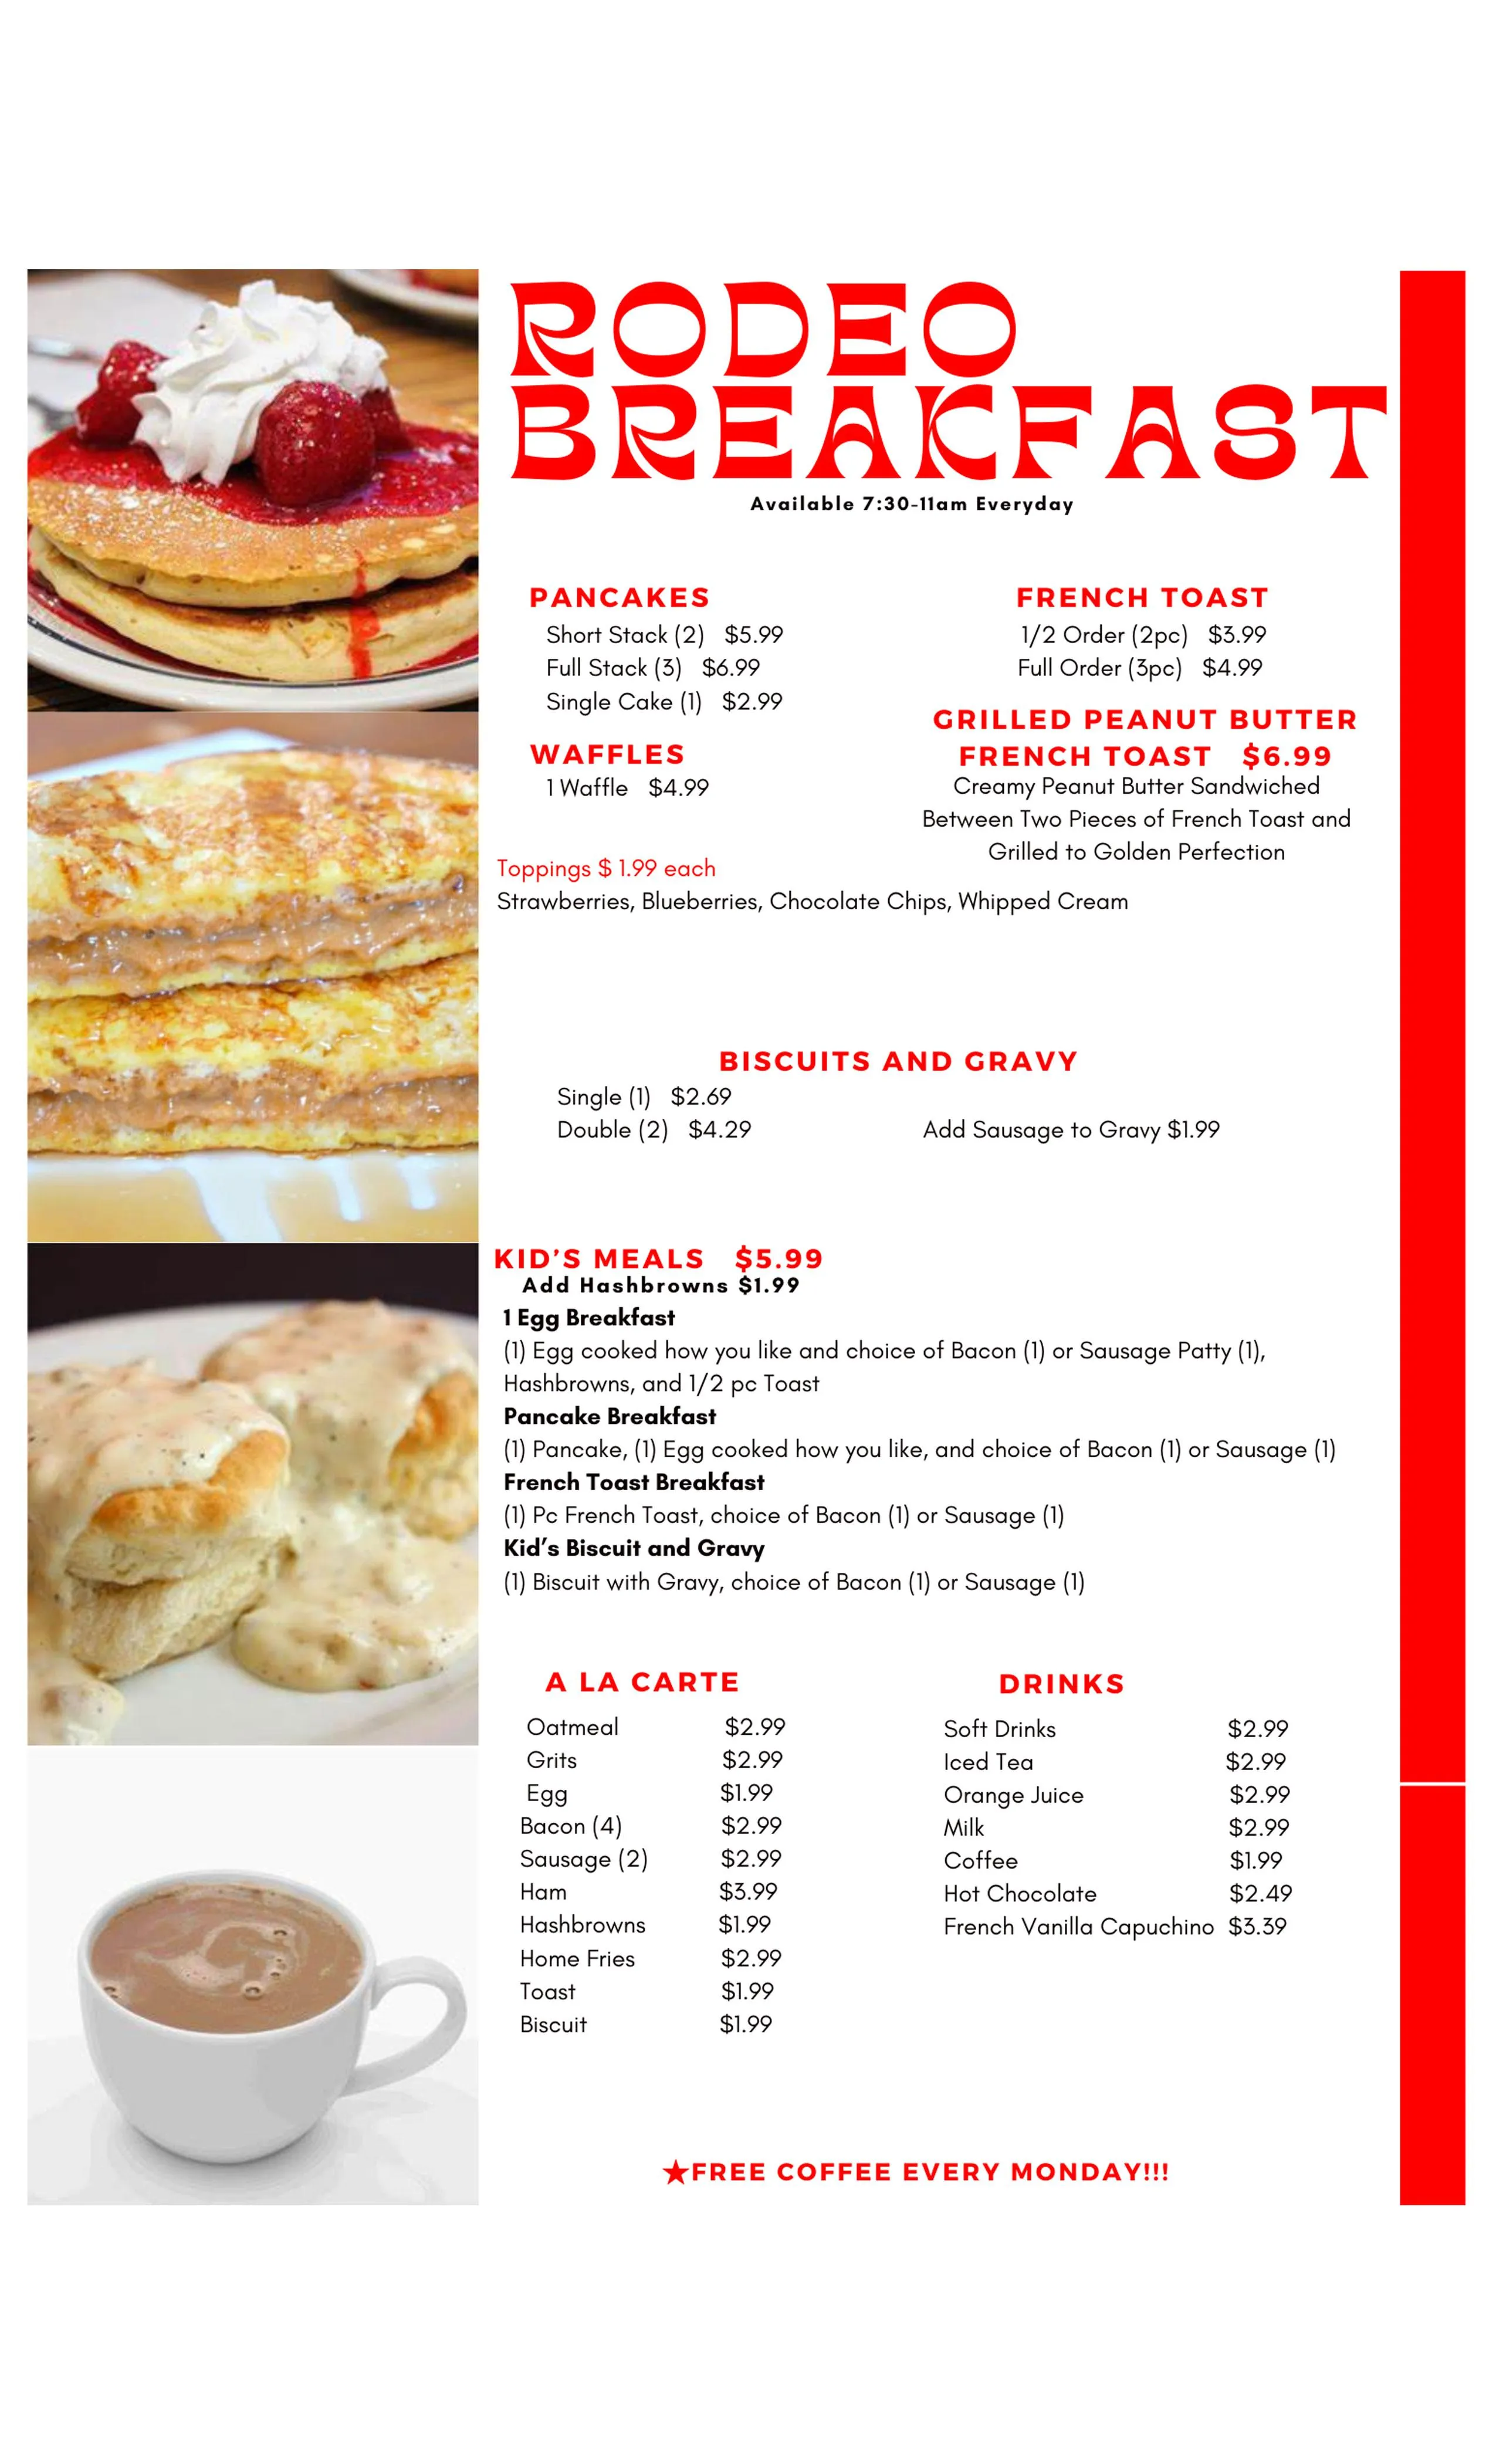 The Rodeo in Okmulgee breakfast menu page 2